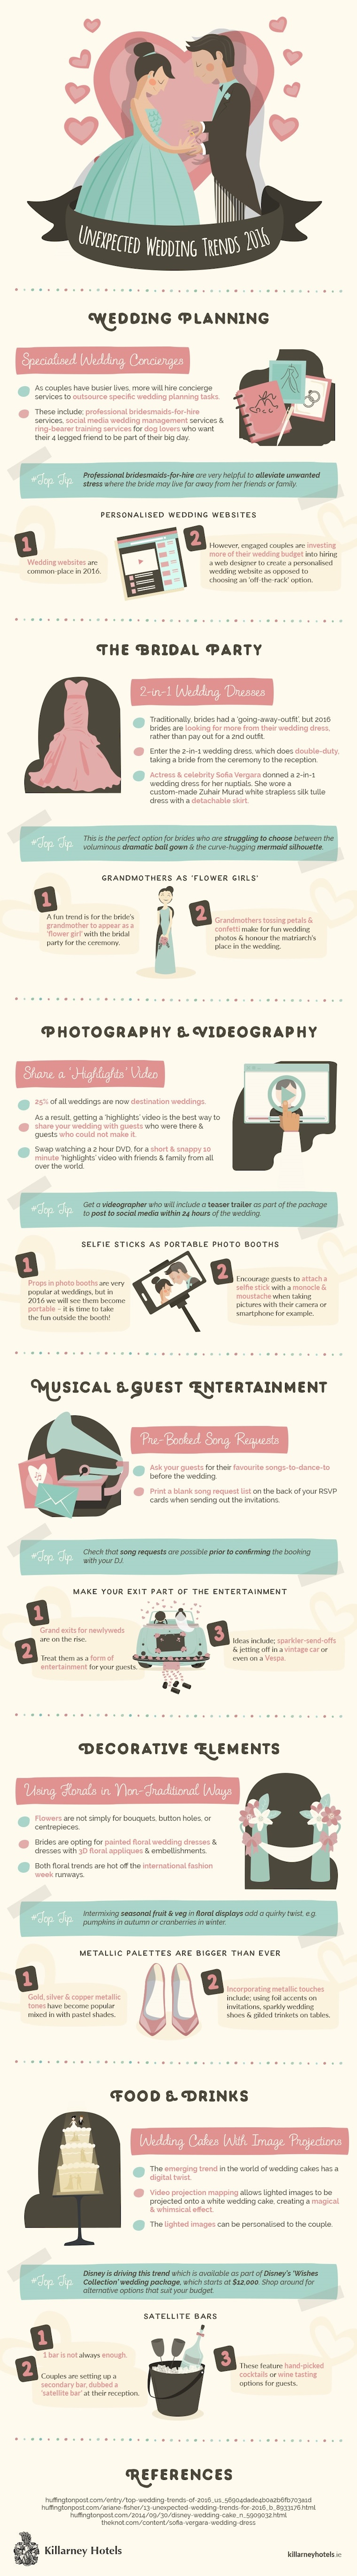 Unexpected Wedding Trends 2016-infographic-Kilarney